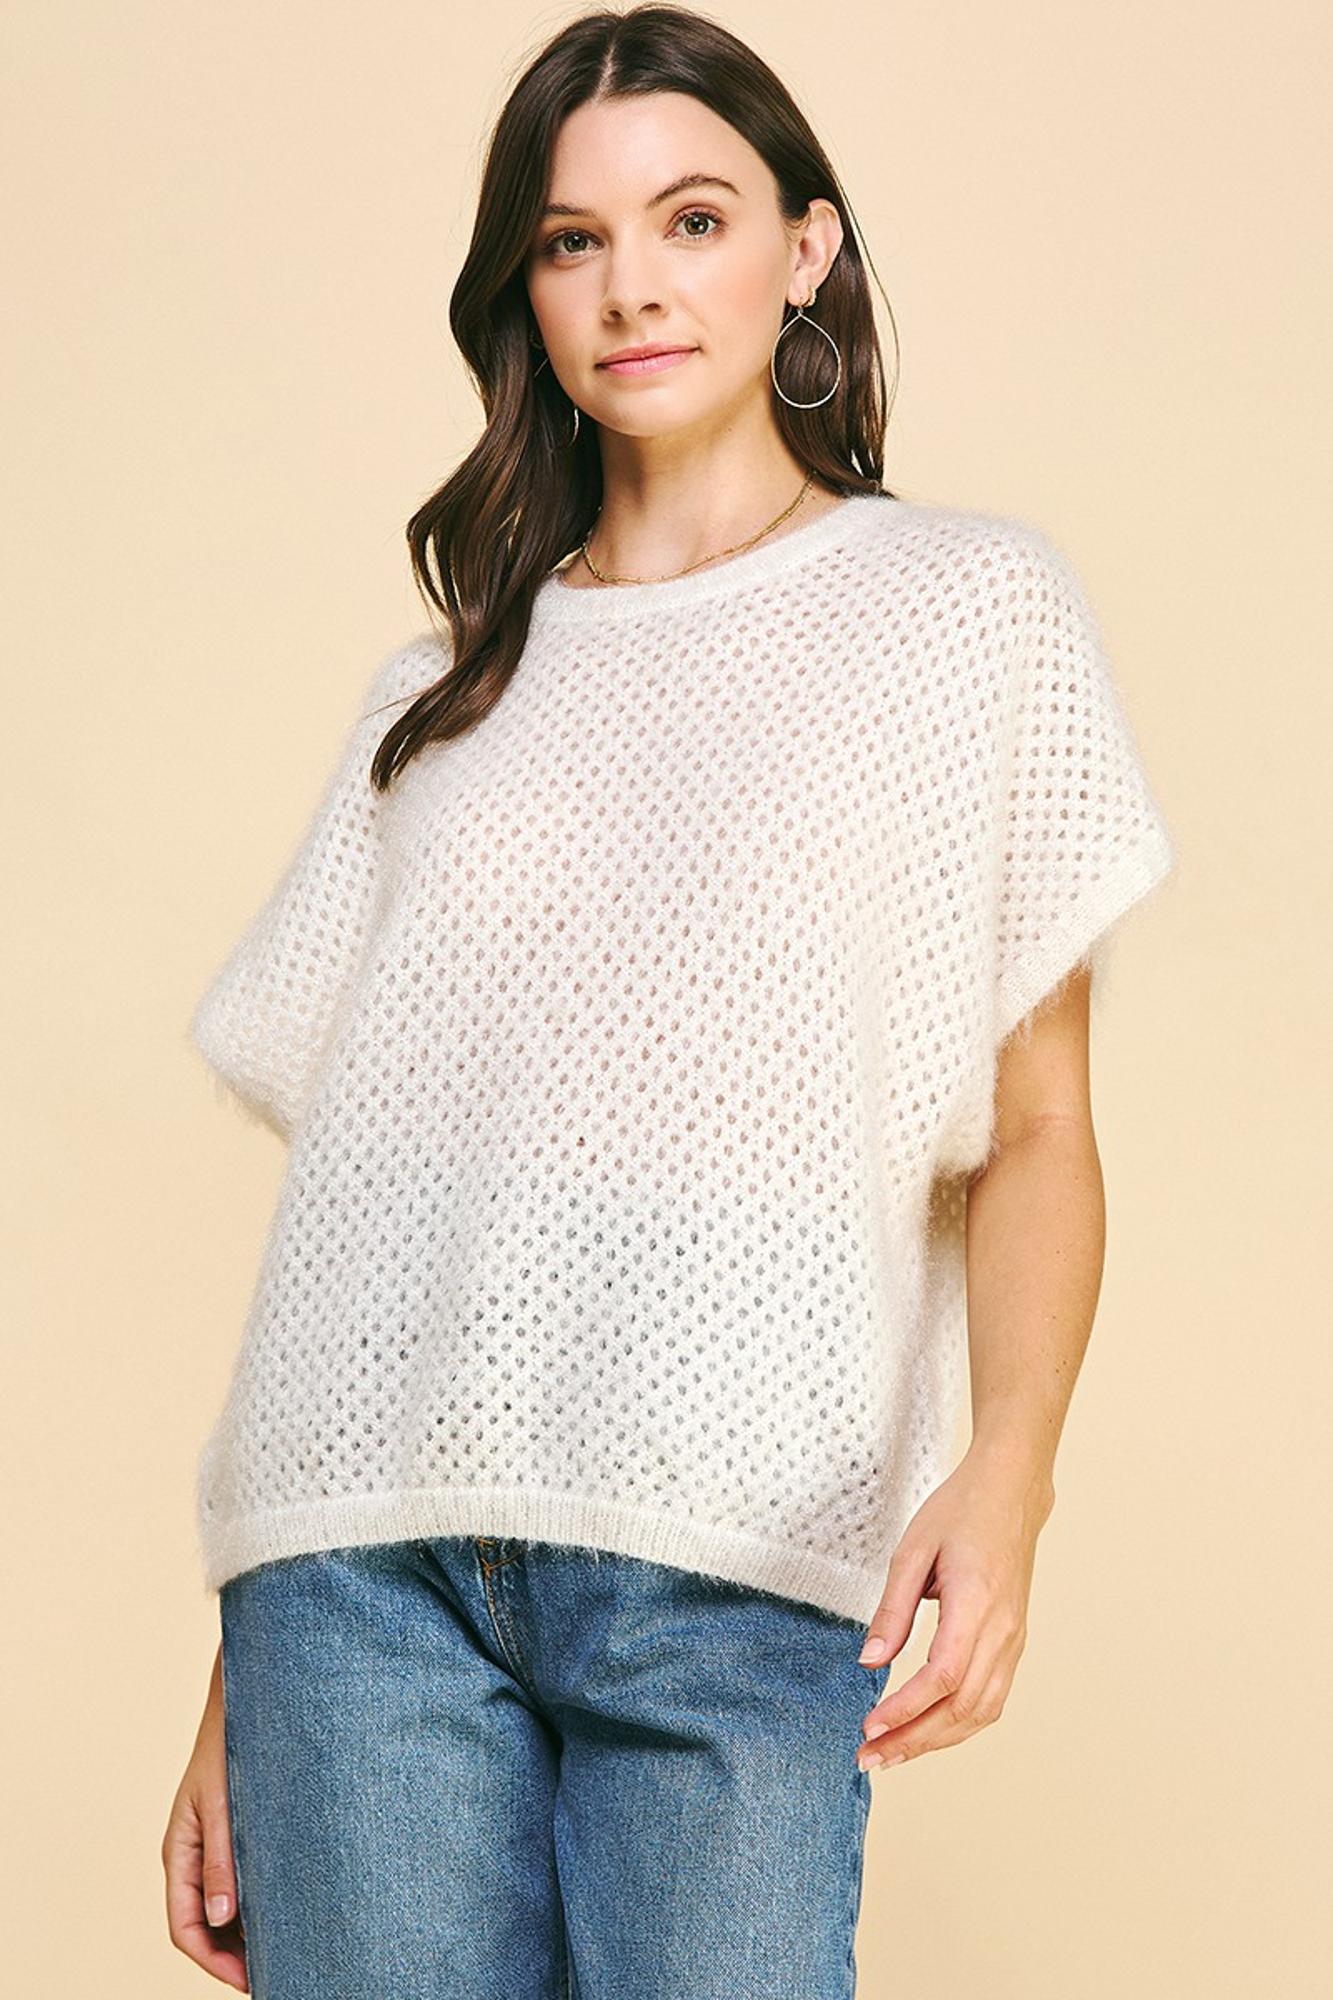 With The Trend Short Sleeve Sweater